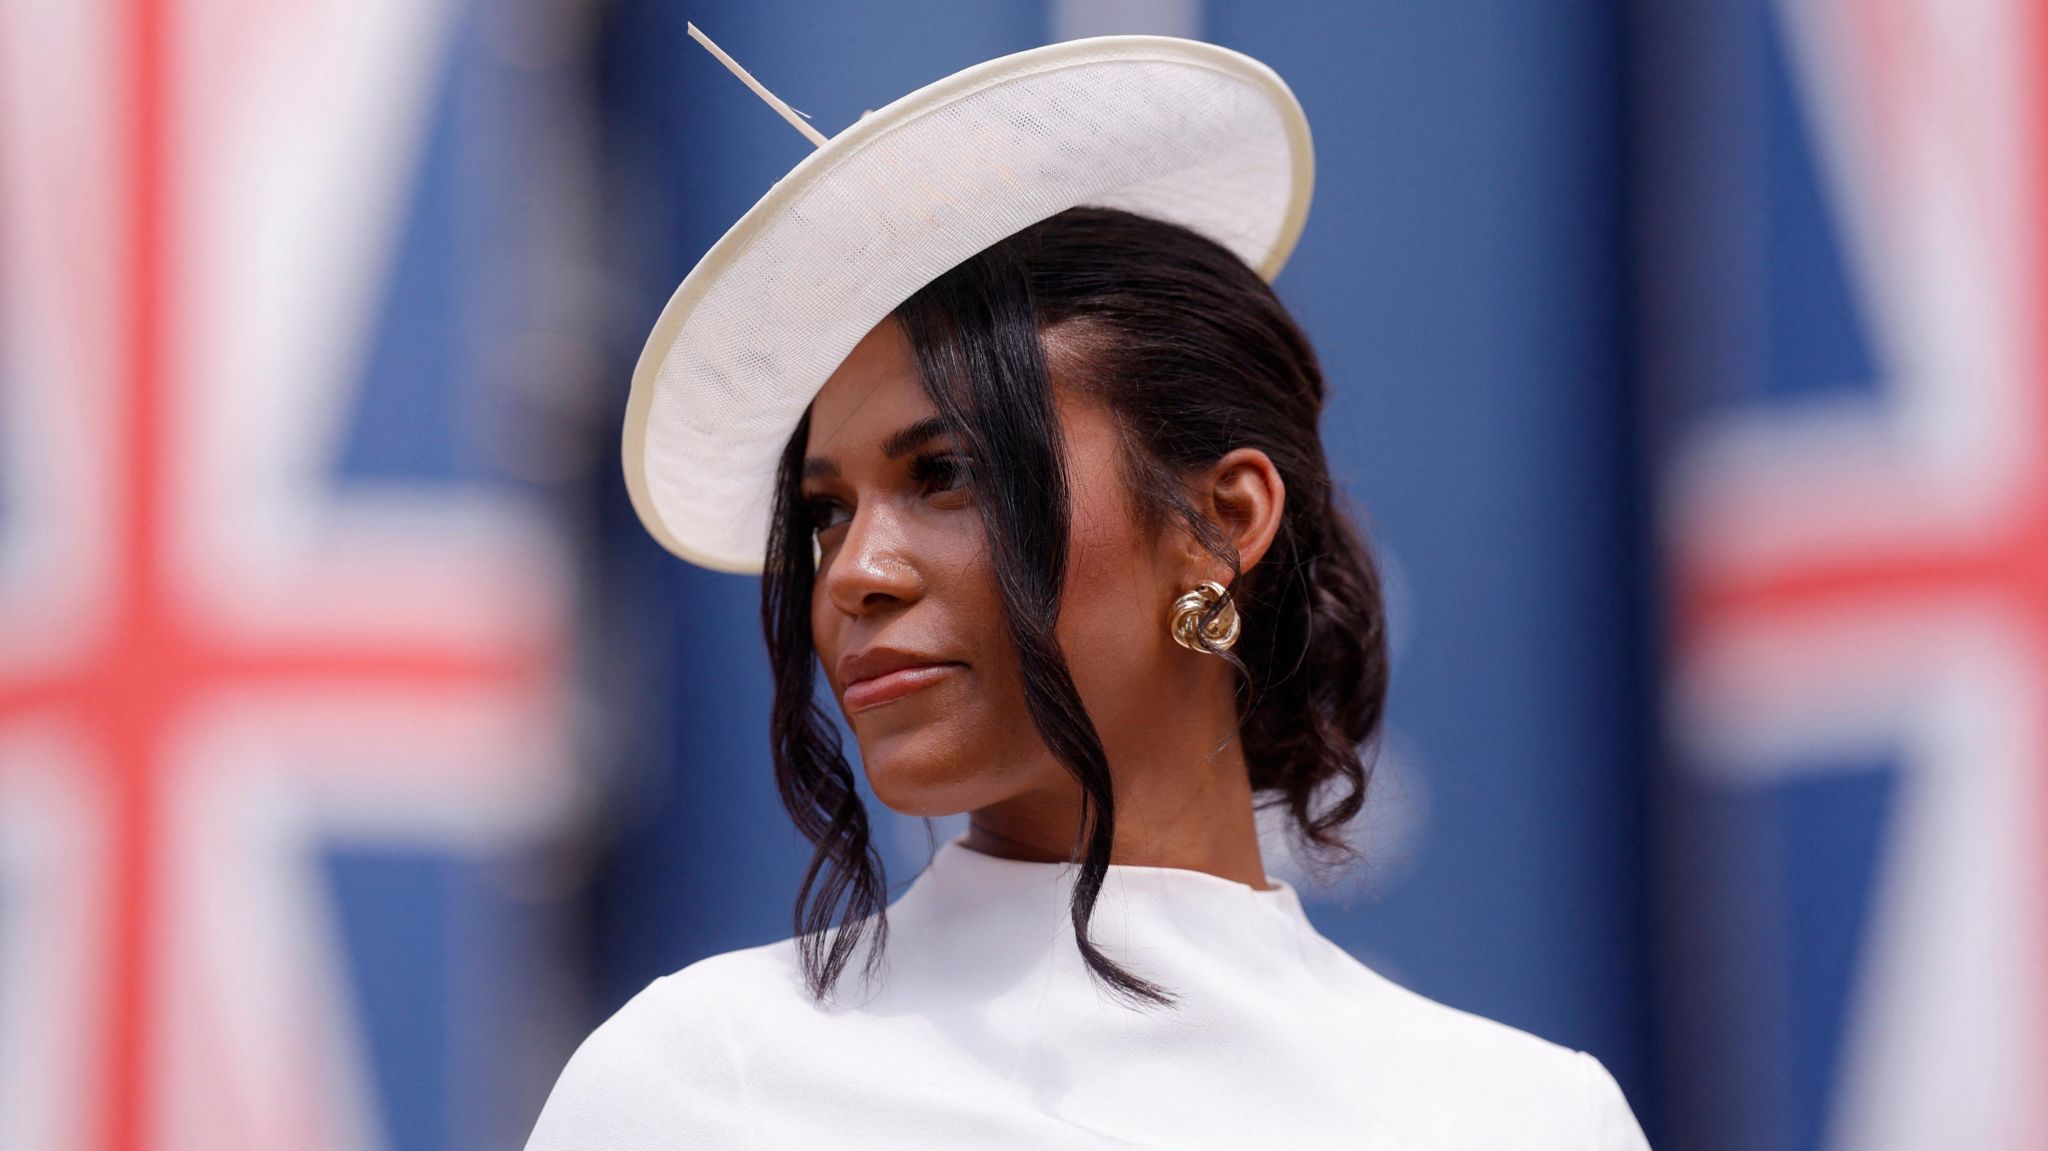 A woman looks away from the camera, wearing a wide brimmed white headdress, curled black hair in a messy bun and a high collar white blouse